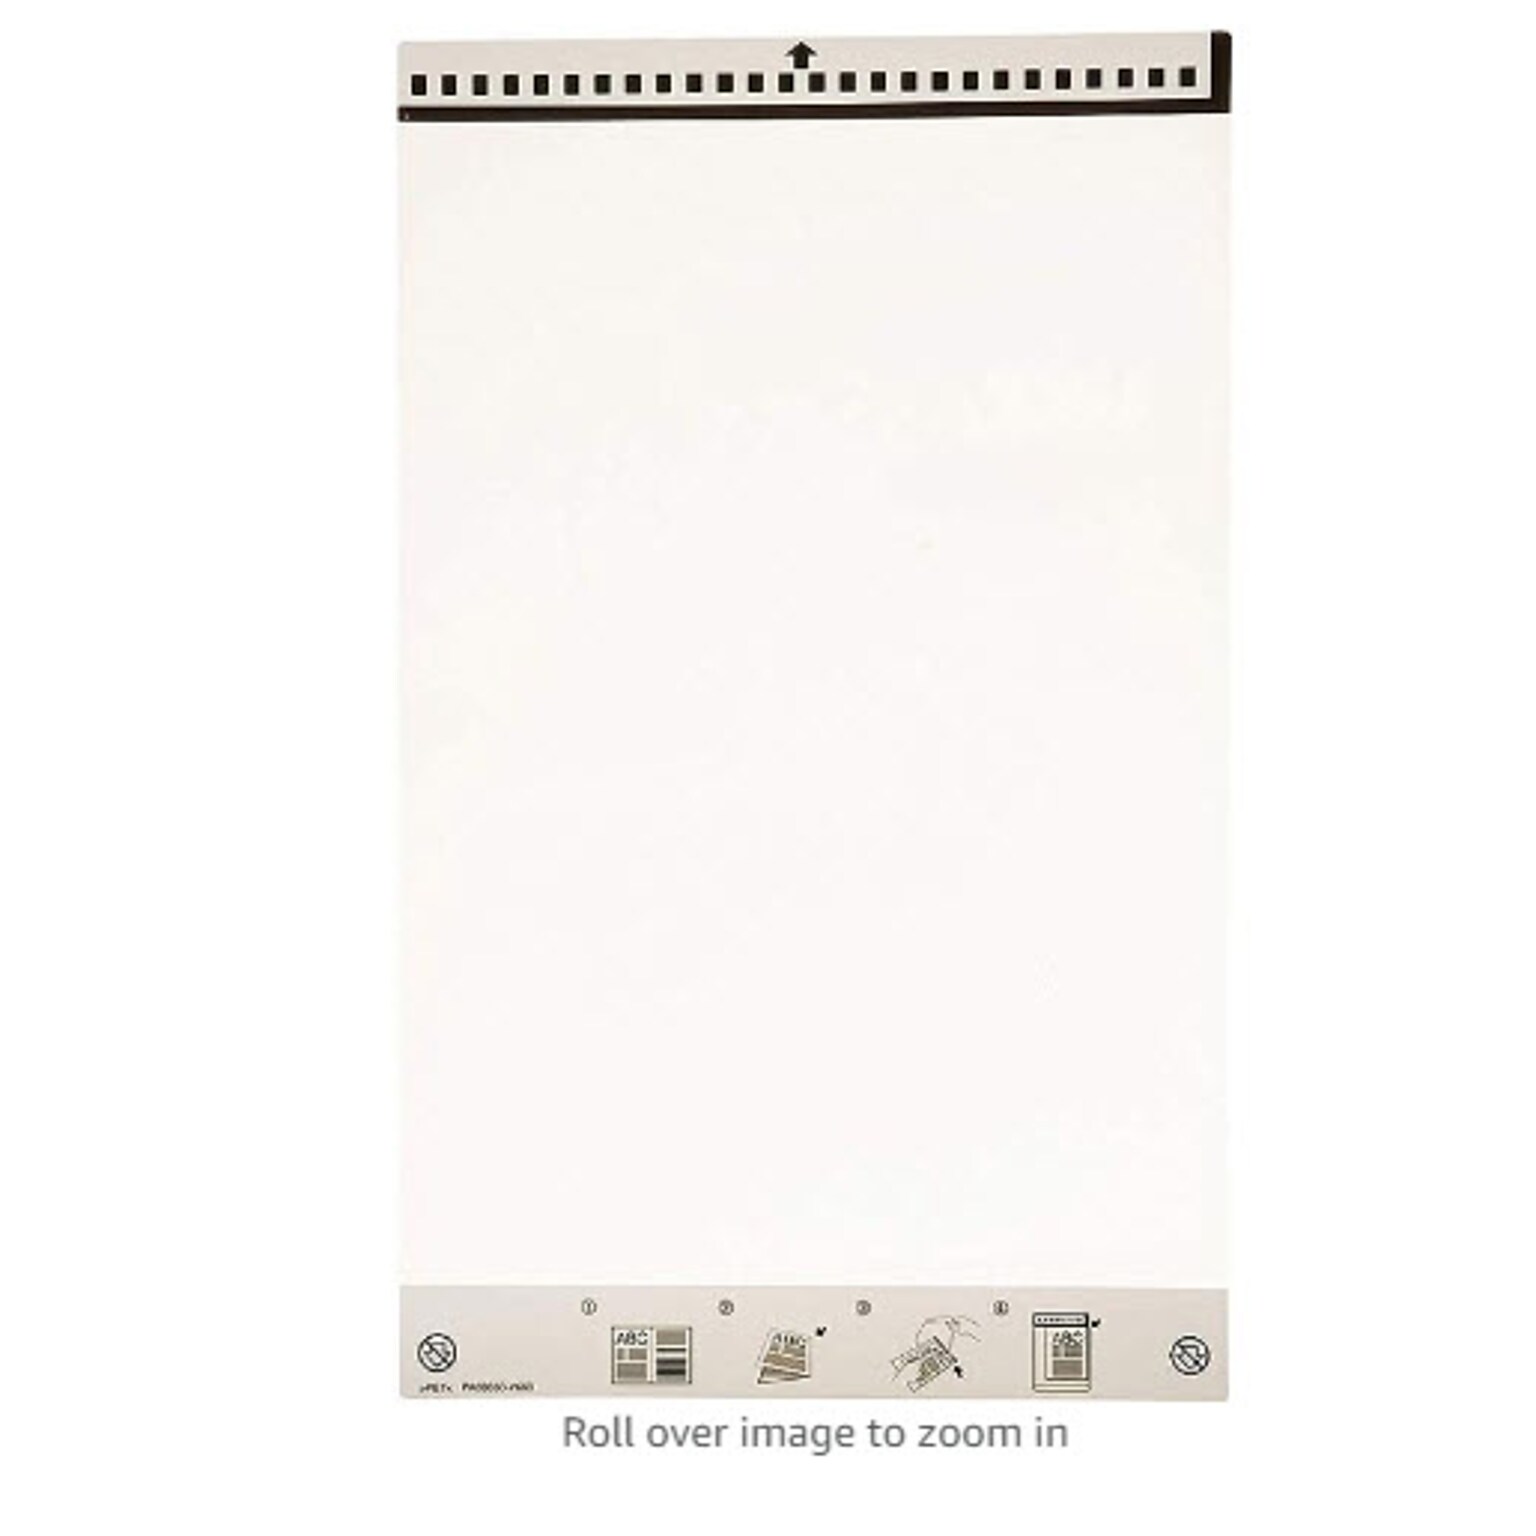 Fujitsu® ScanSnap PA03360-0013 Intended Carrier Sheet for Scansnap fi-5110EOX2, S1100